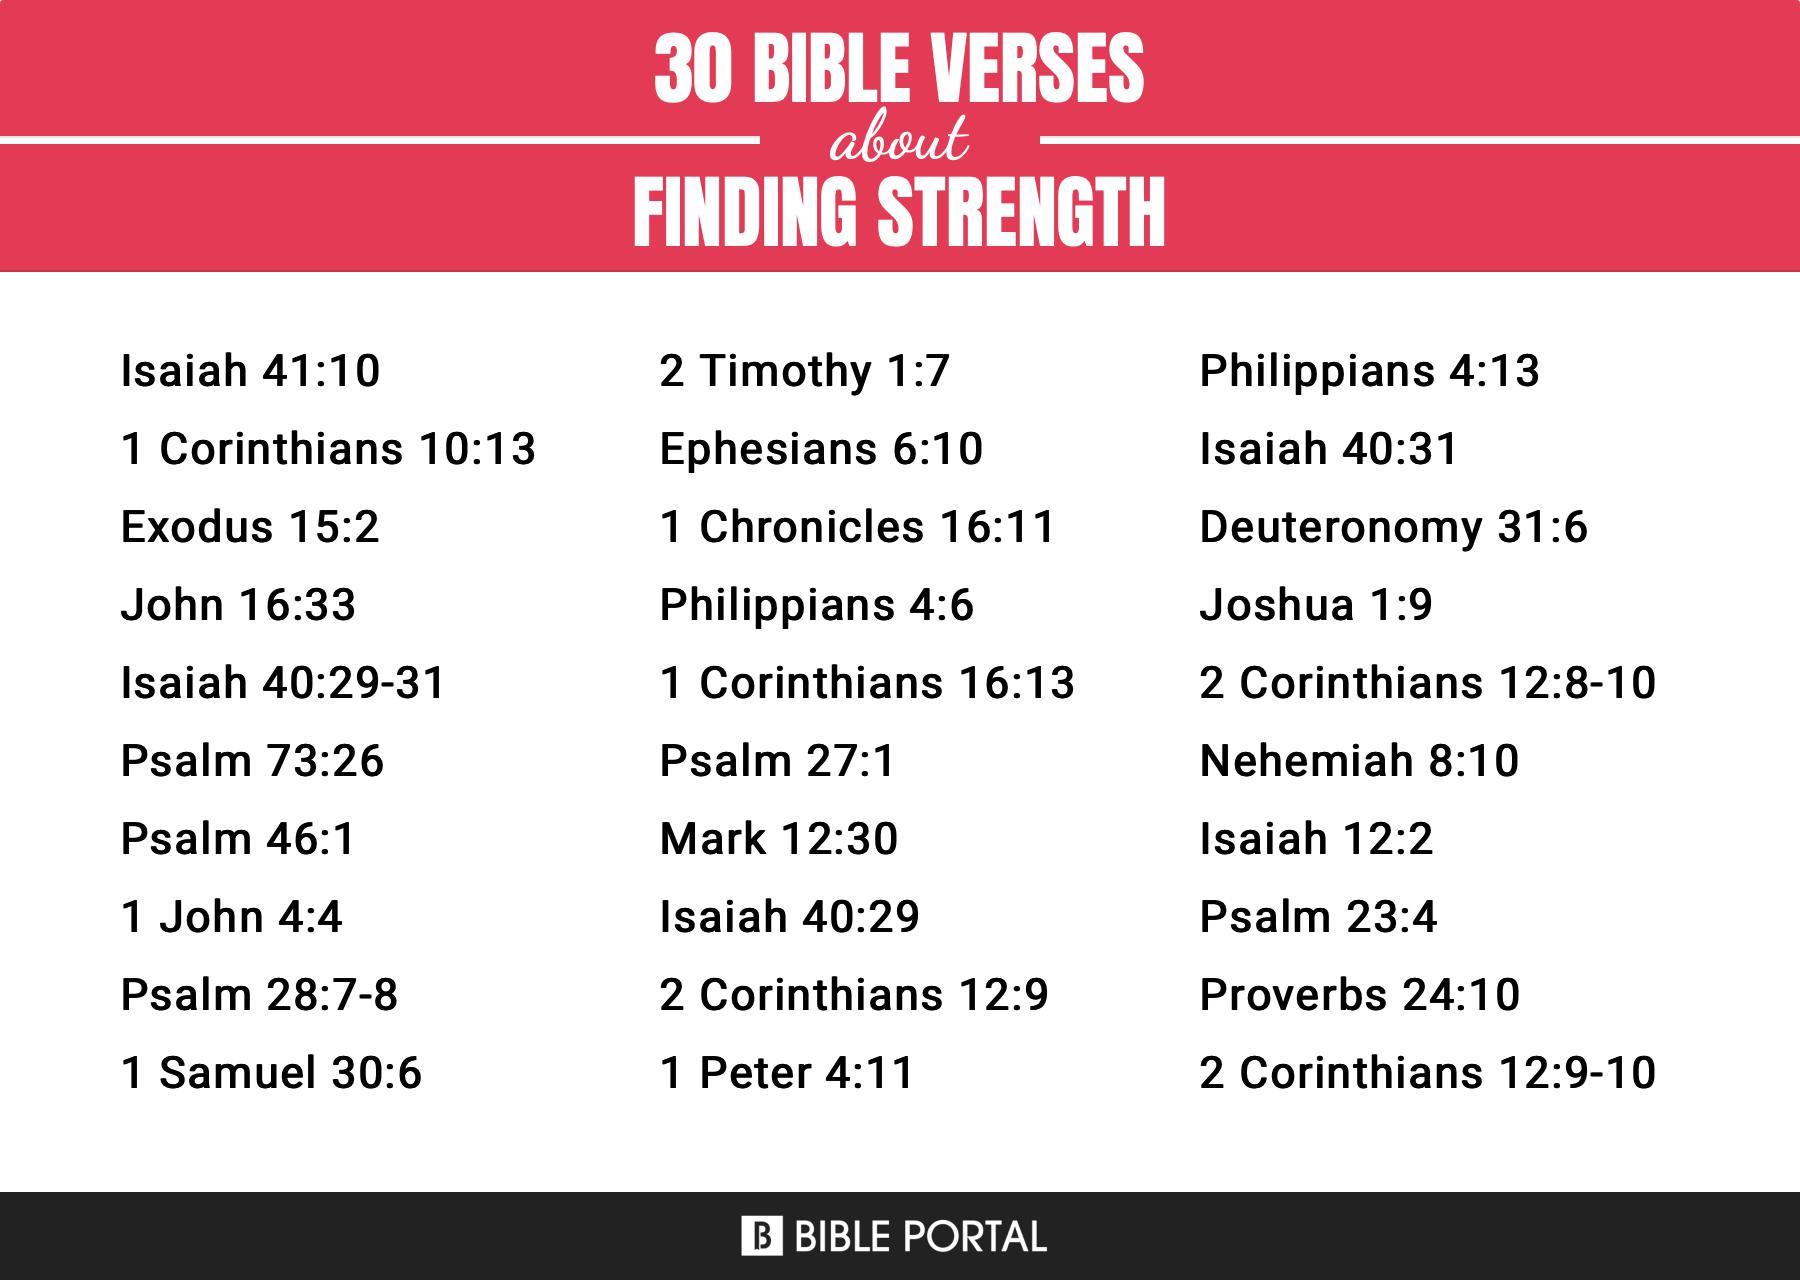 What Does the Bible Say about Finding Strength?